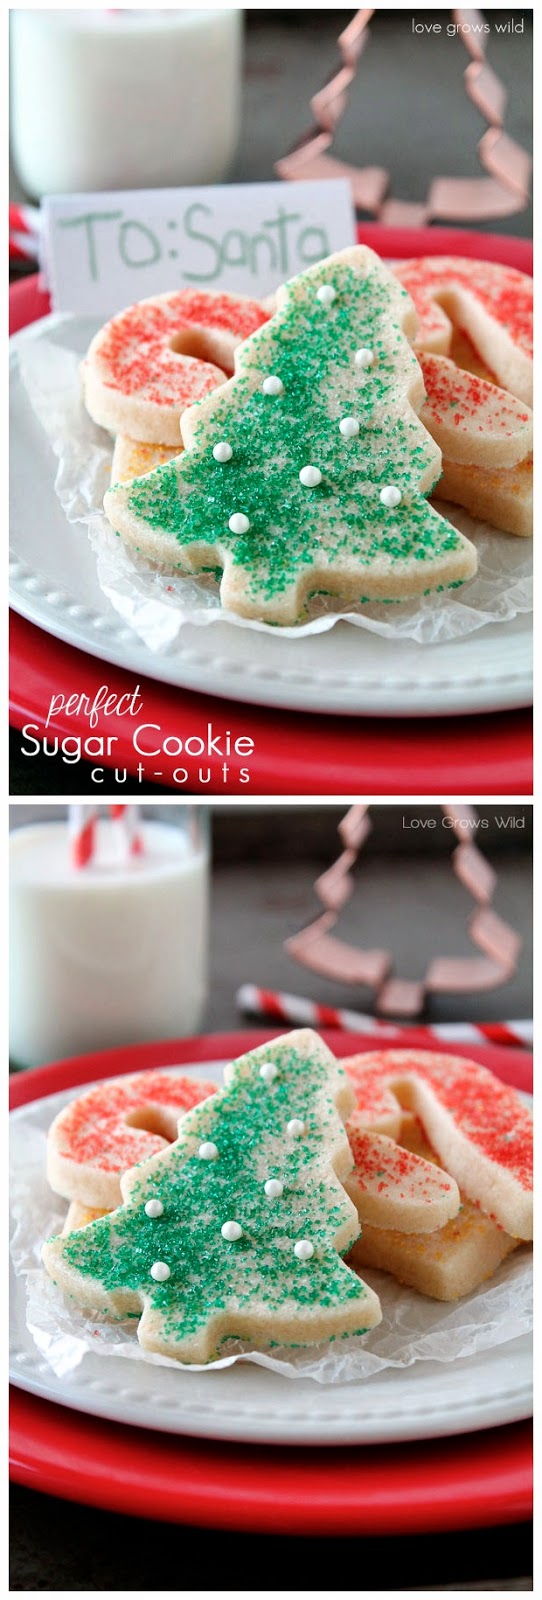 Perfect Sugar Cookie Cut-outs ~ Top Kitchen Magazine